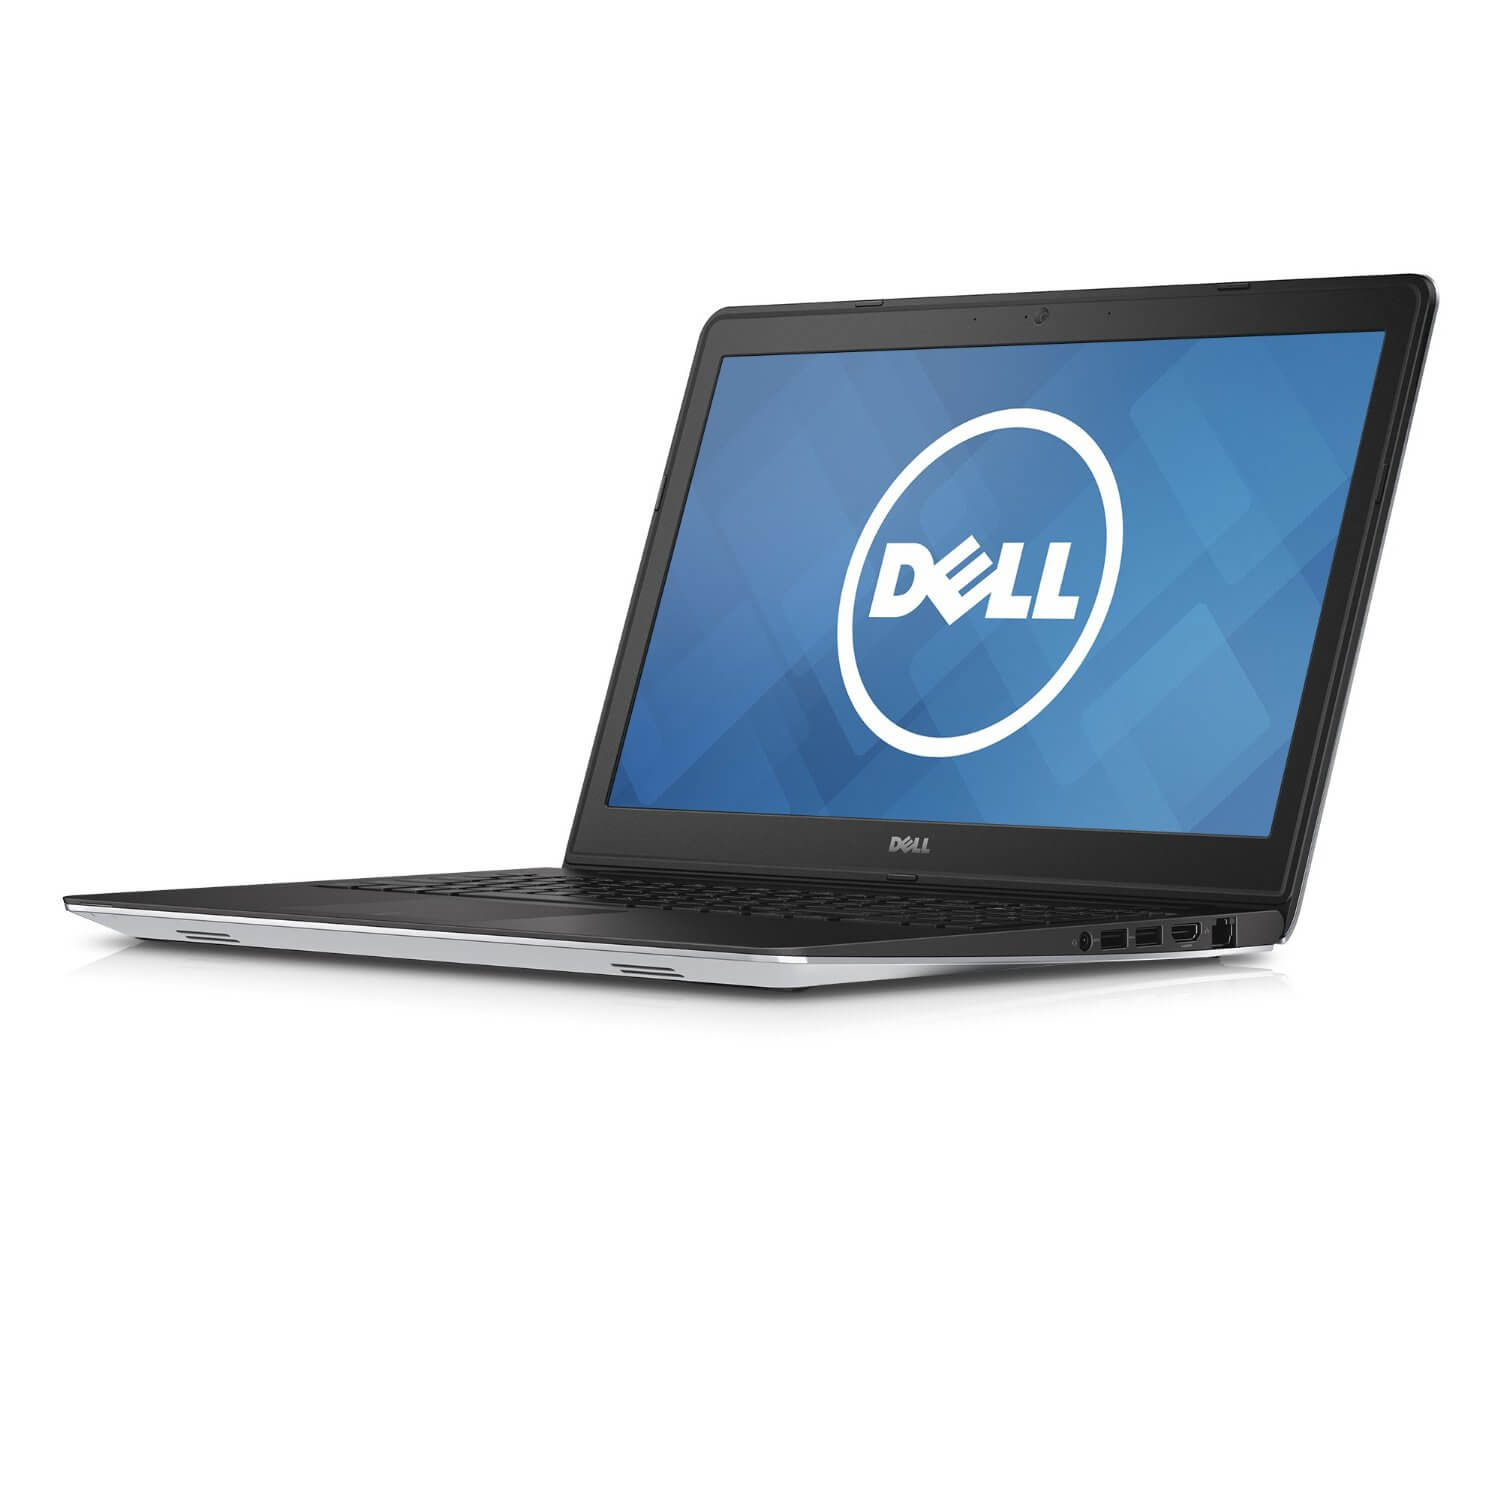 Dell Inspiron 15 5000 Series laptop